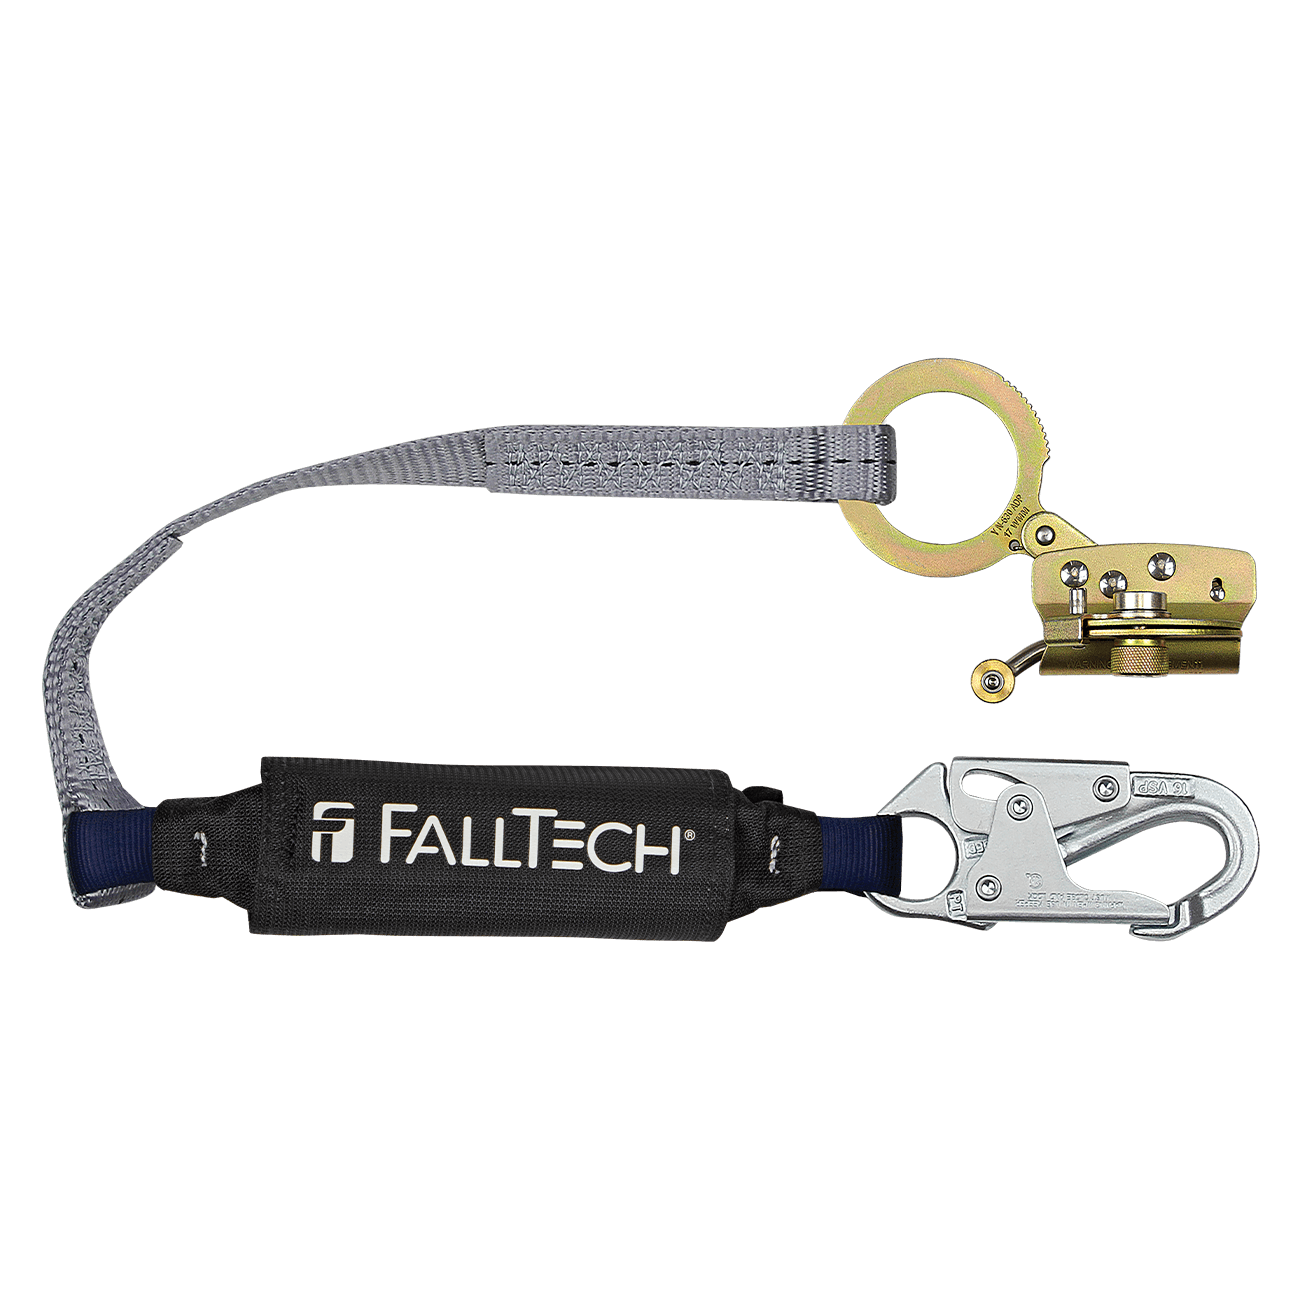 Hinged Trailing Fall Arrester with Anti-panic and 3' ViewPack® Energy Absorbing Lanyard - CSA